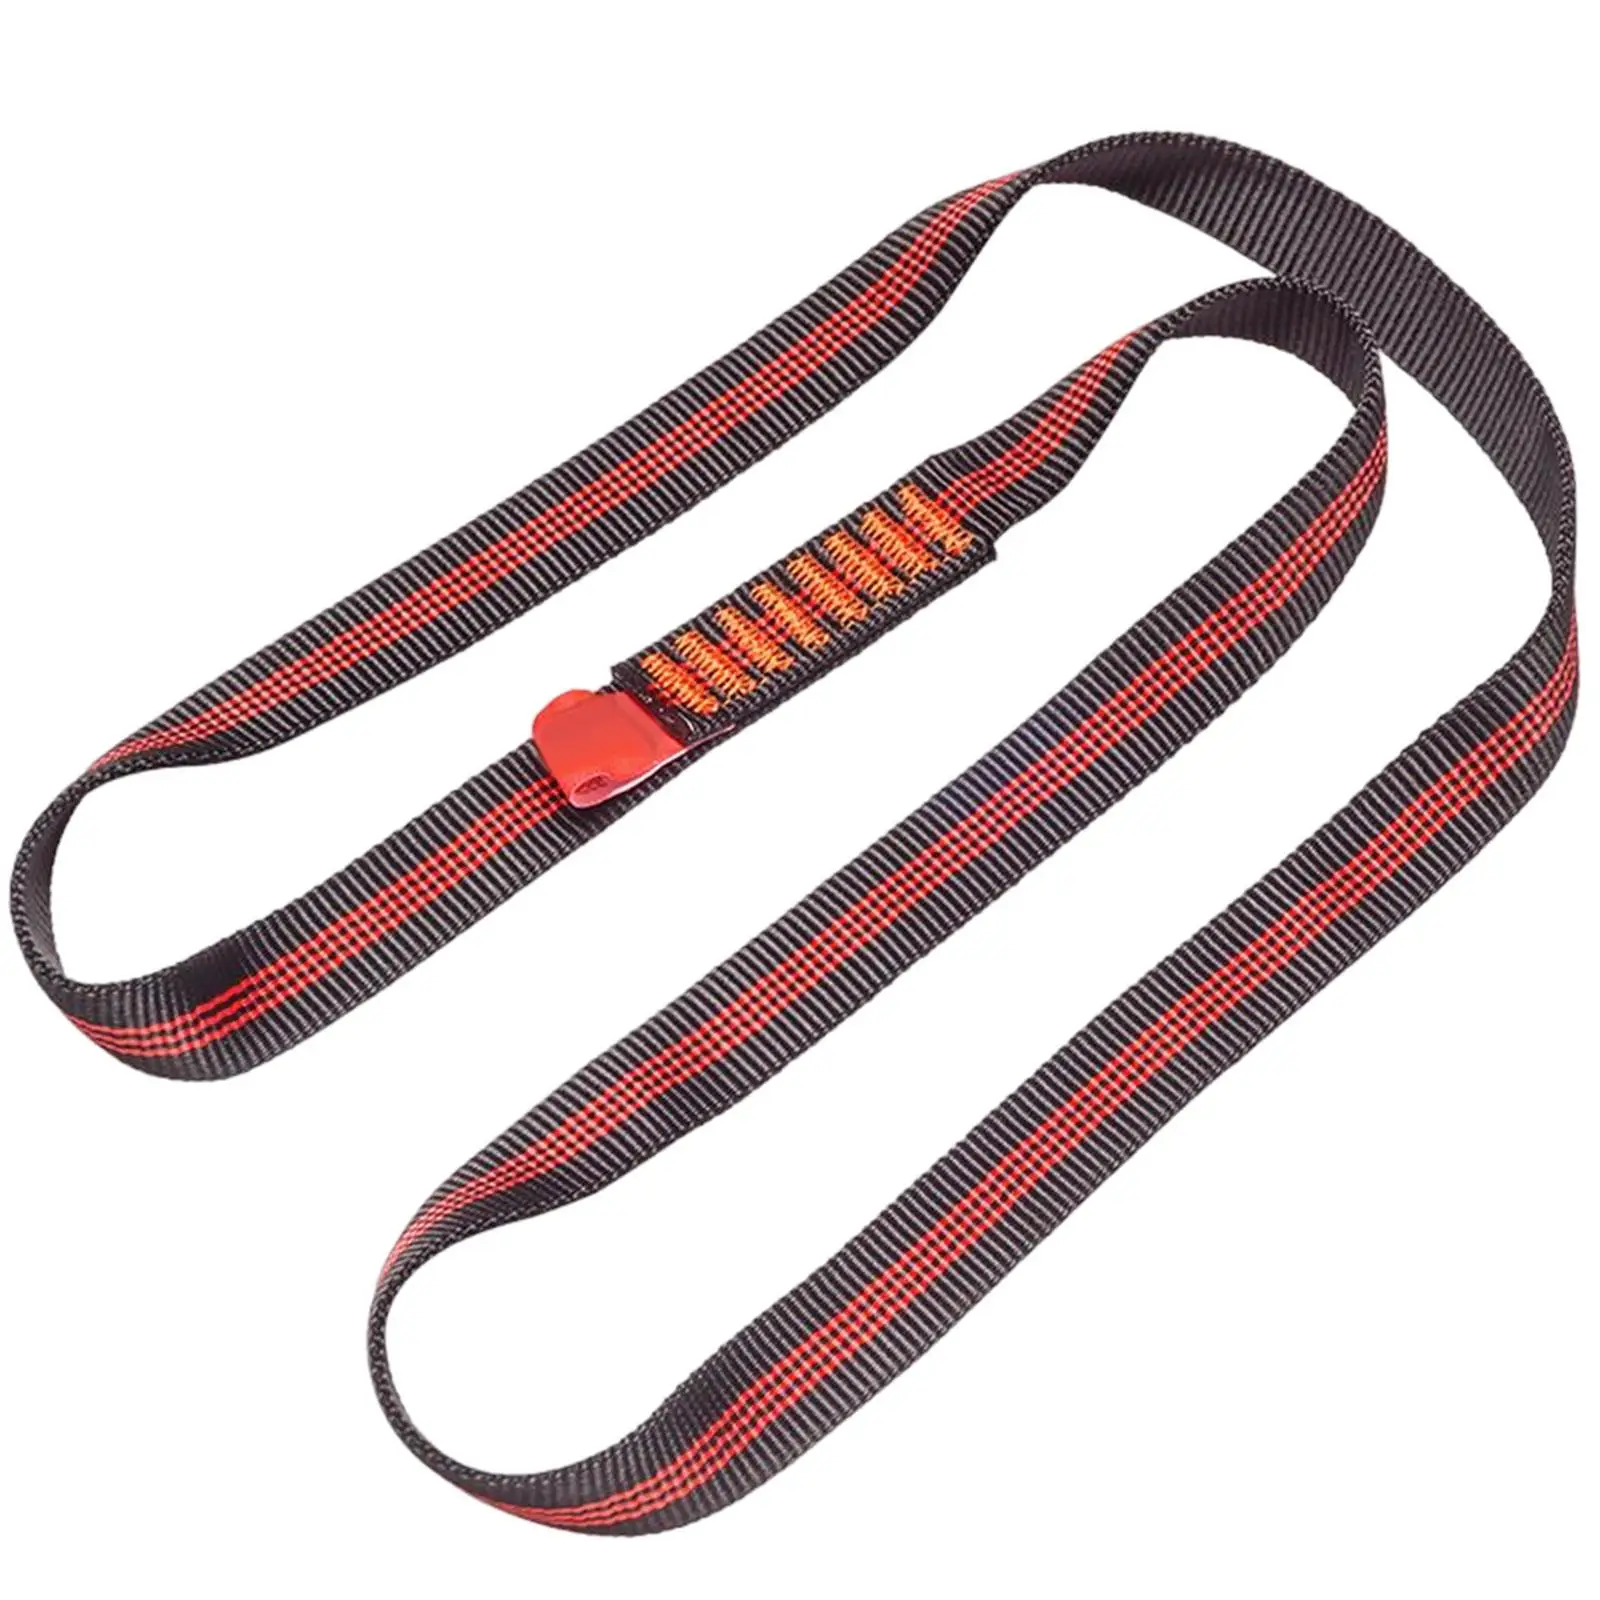 Sling Runners, Rock Climbing Loop Sling Belt, 22kN Webbing Straps, 21mm Climbing Sling Rope for Outdoors Camping Tree Work